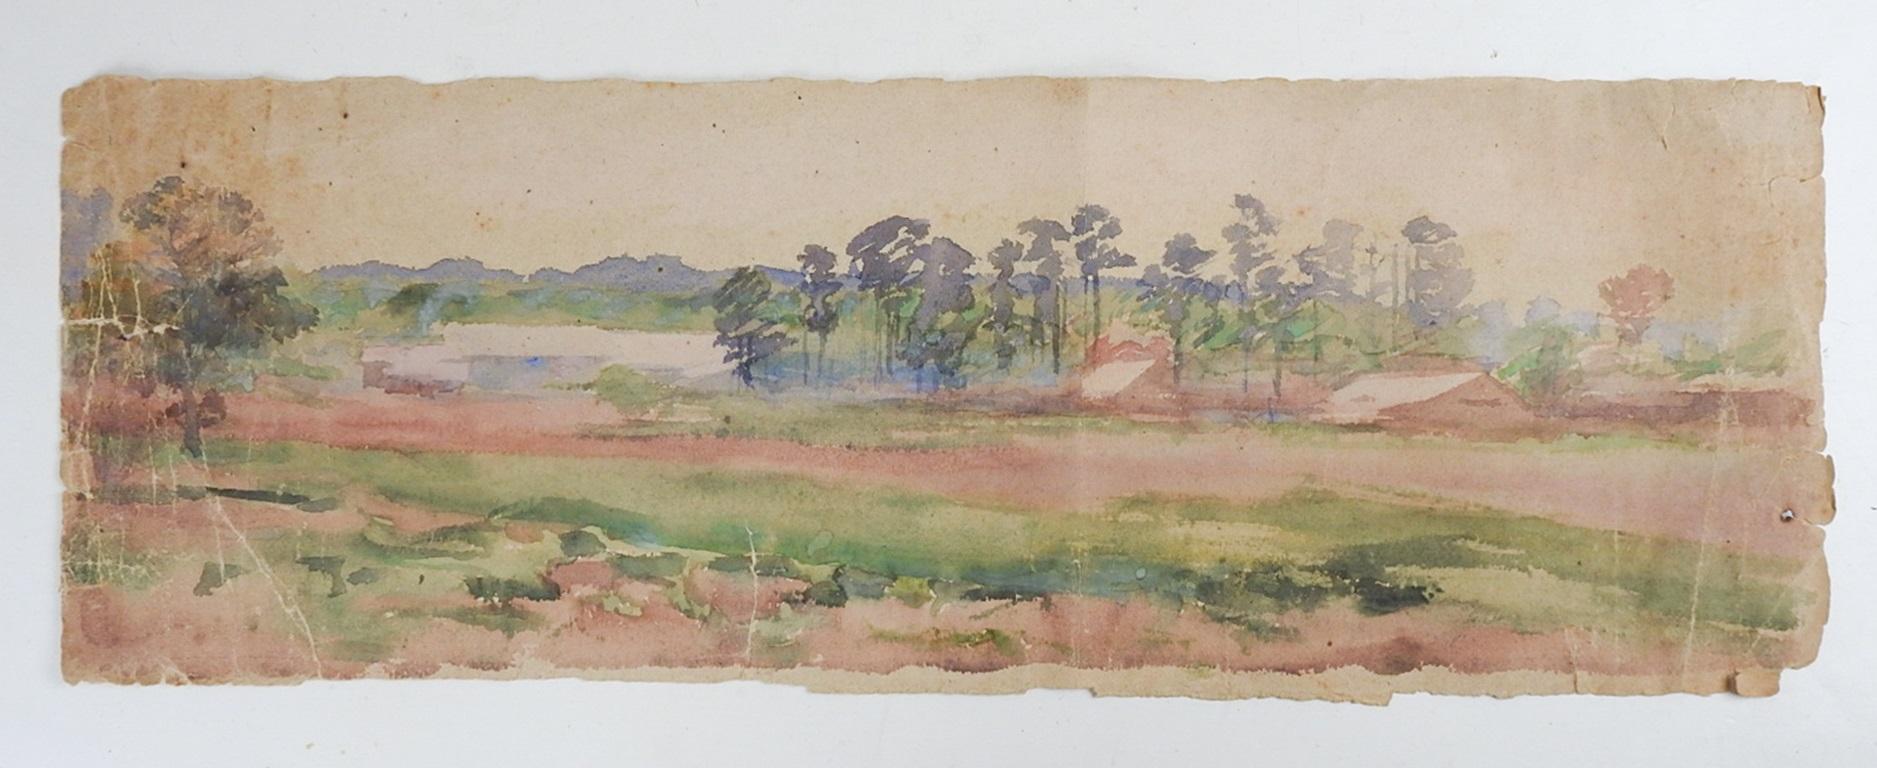 Antique late 19th century watercolor on paper distressed landscape painting.  Unsigned.  Unframed, fading, edge losses, repaired edge tears, creasing.